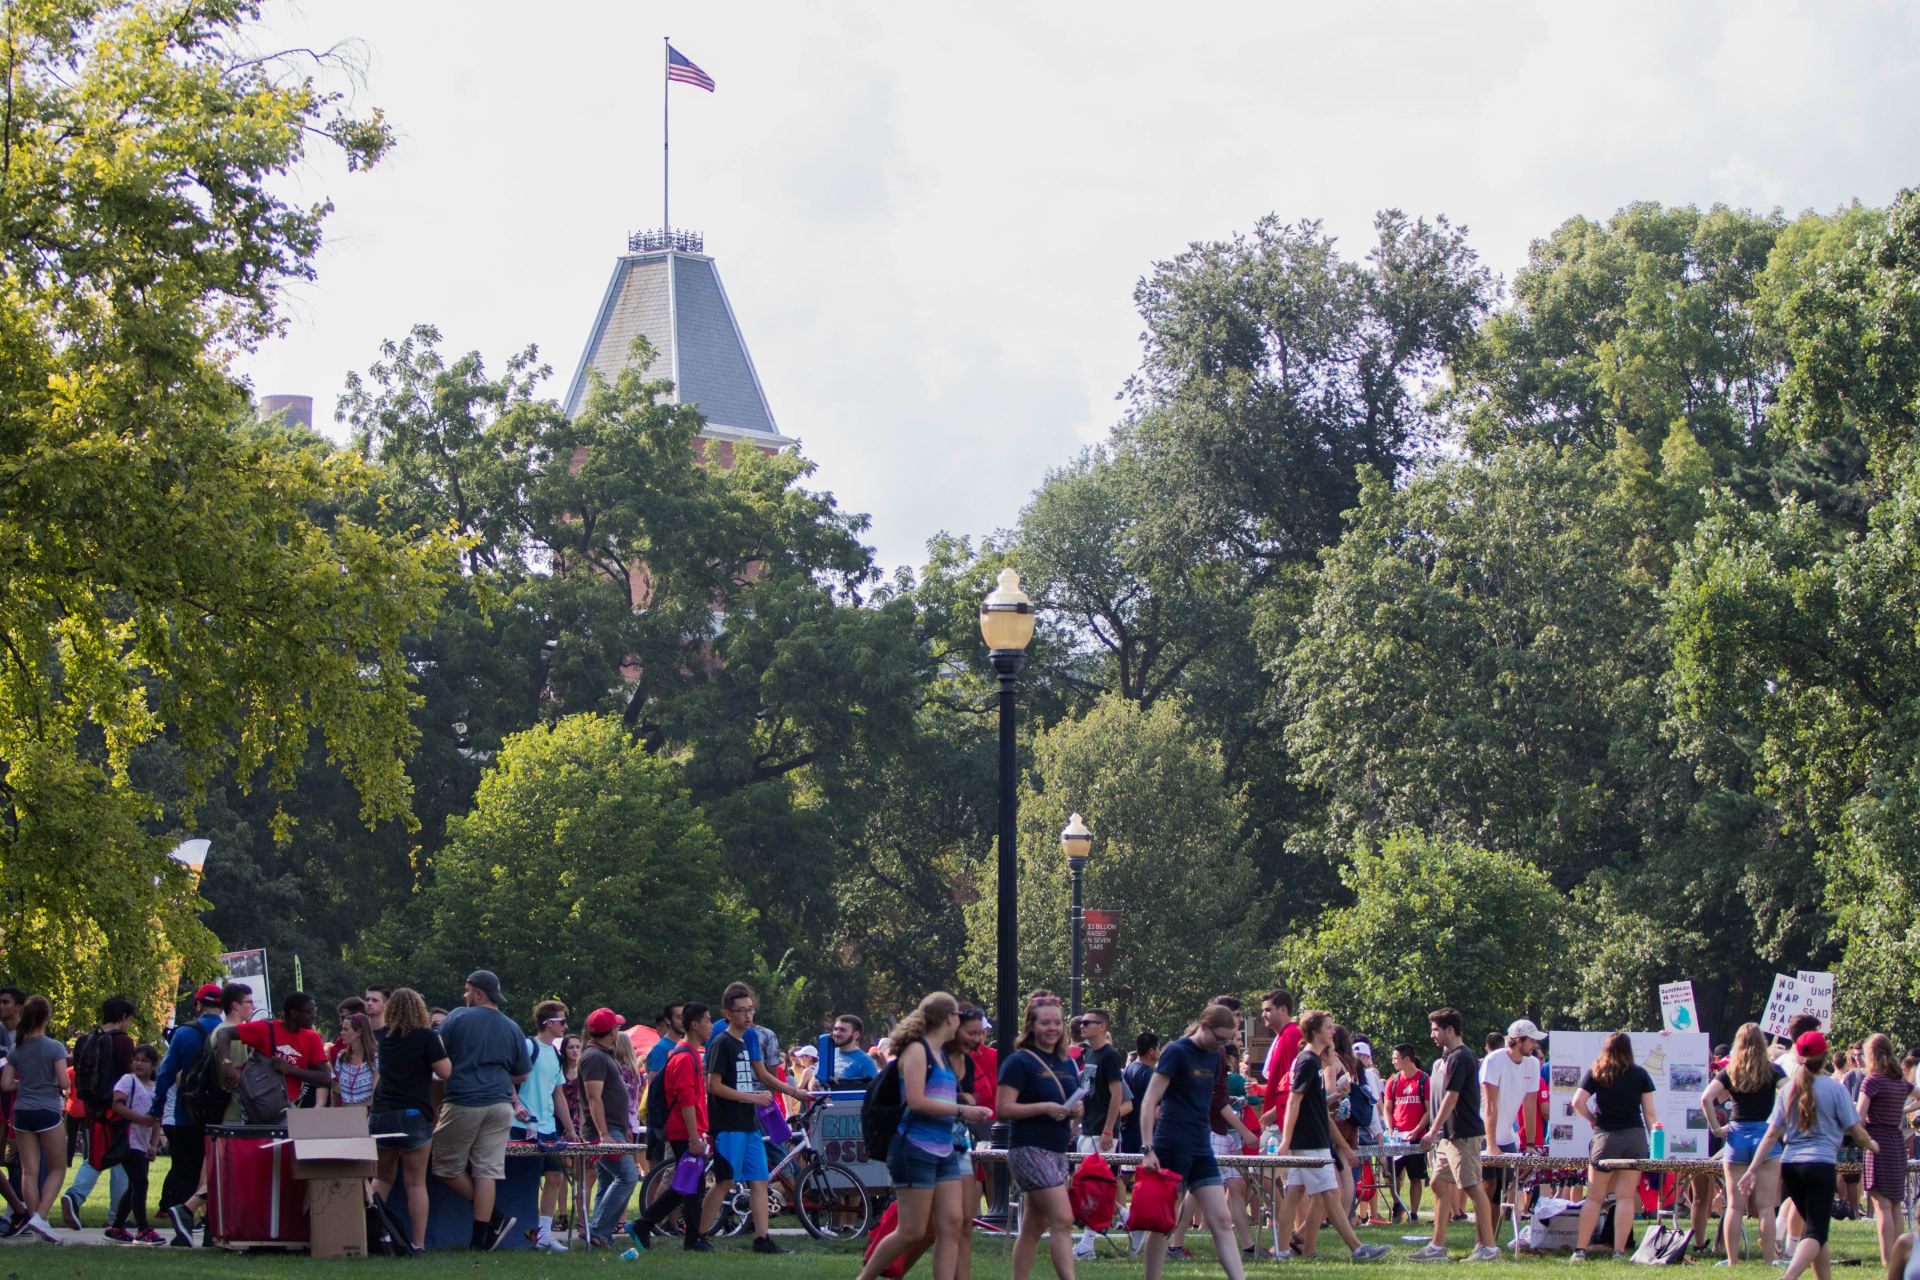 The fall student involvement fair is postponed to Aug. 28 due to severe weather conditions.